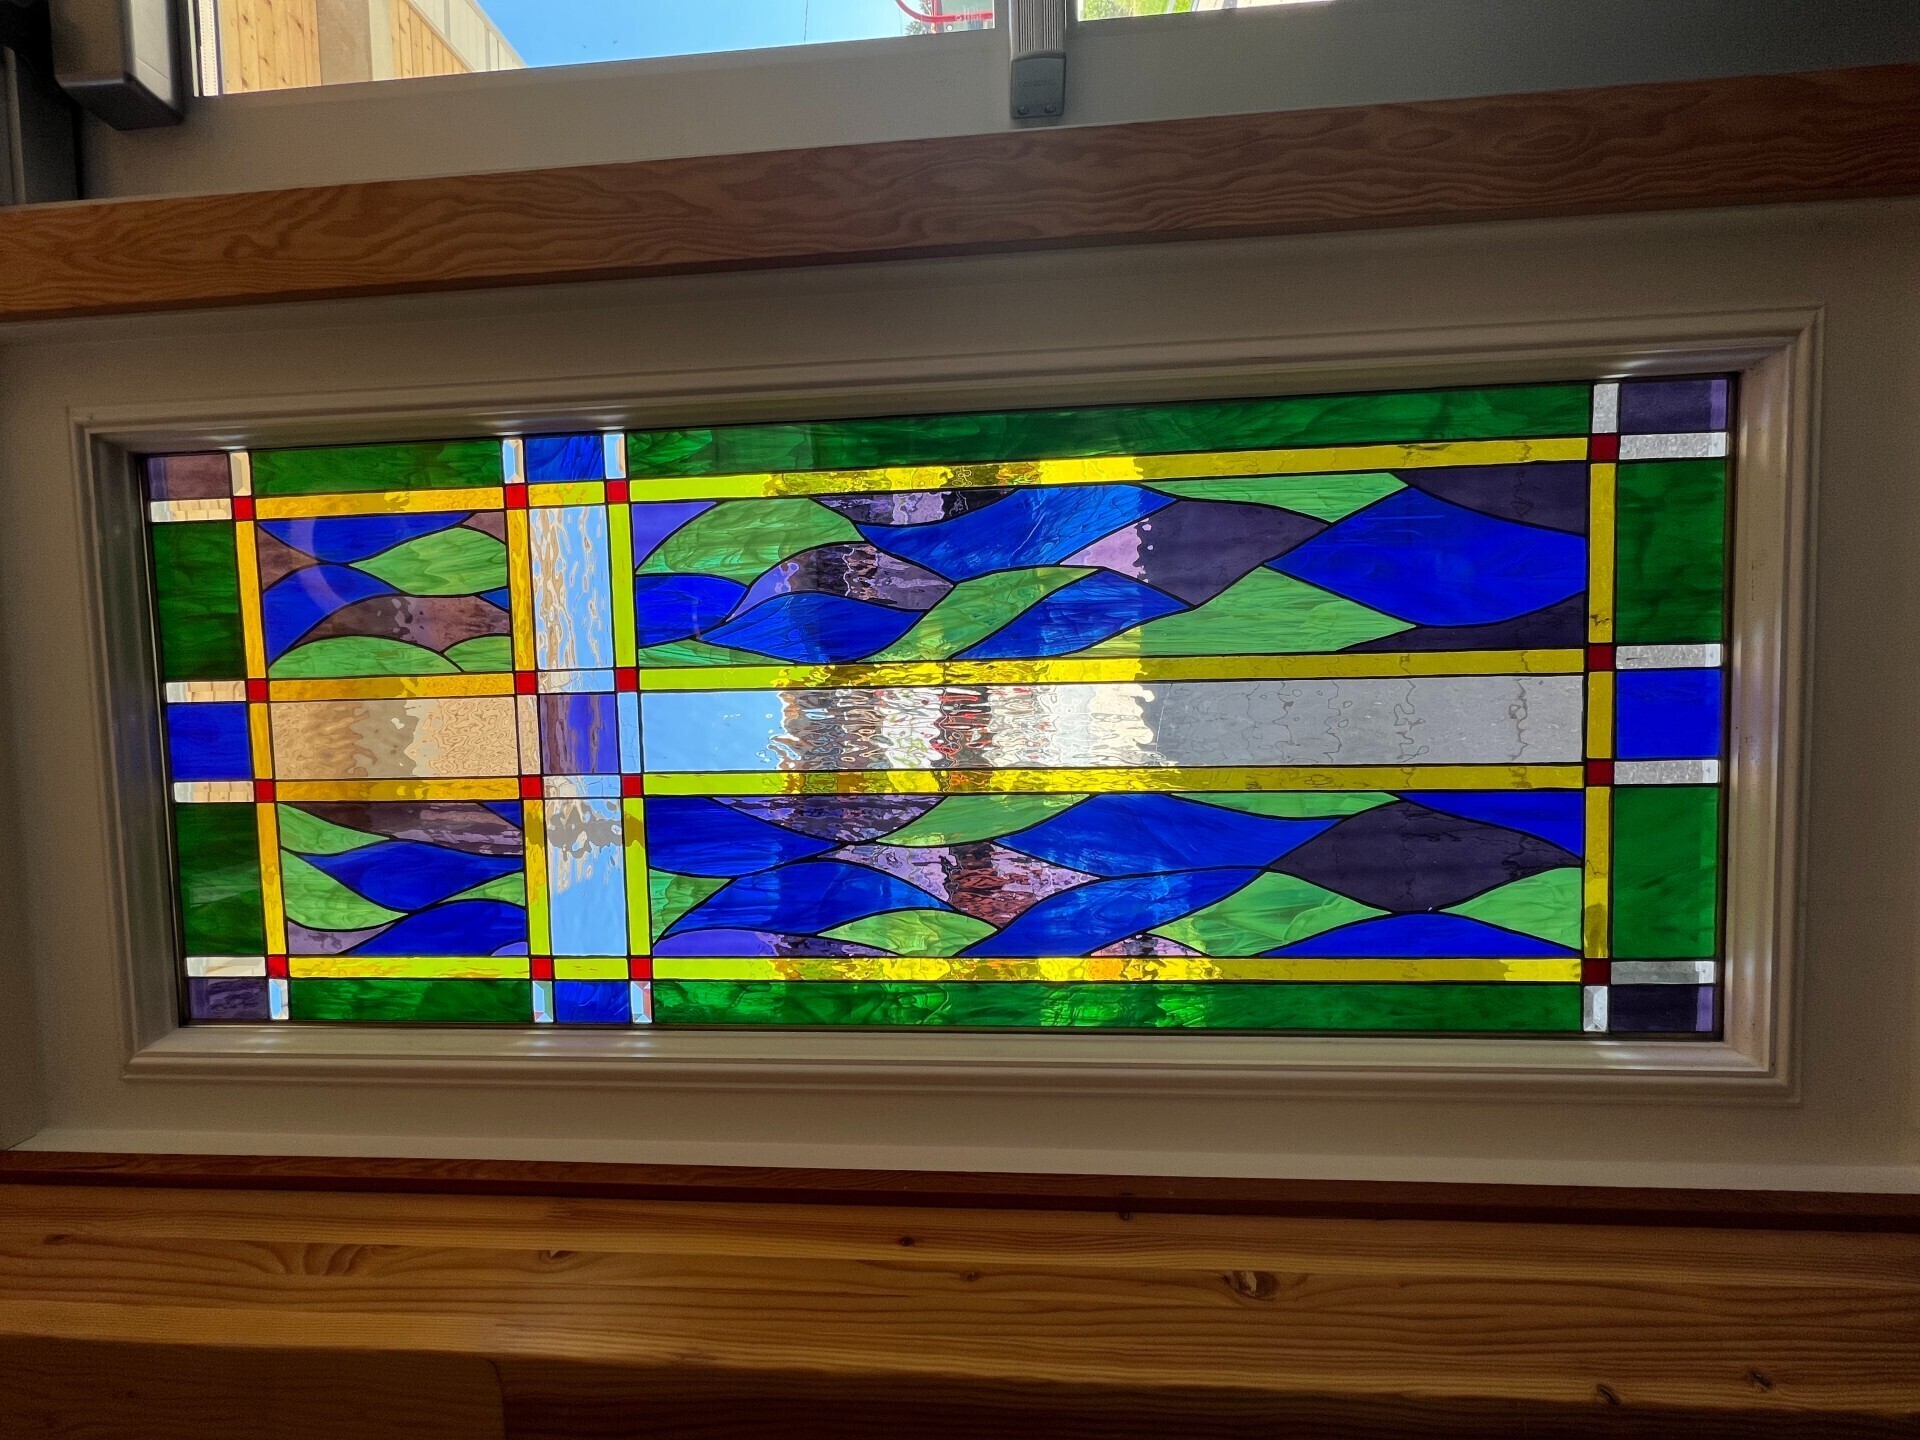 A multicoloured stain glass window